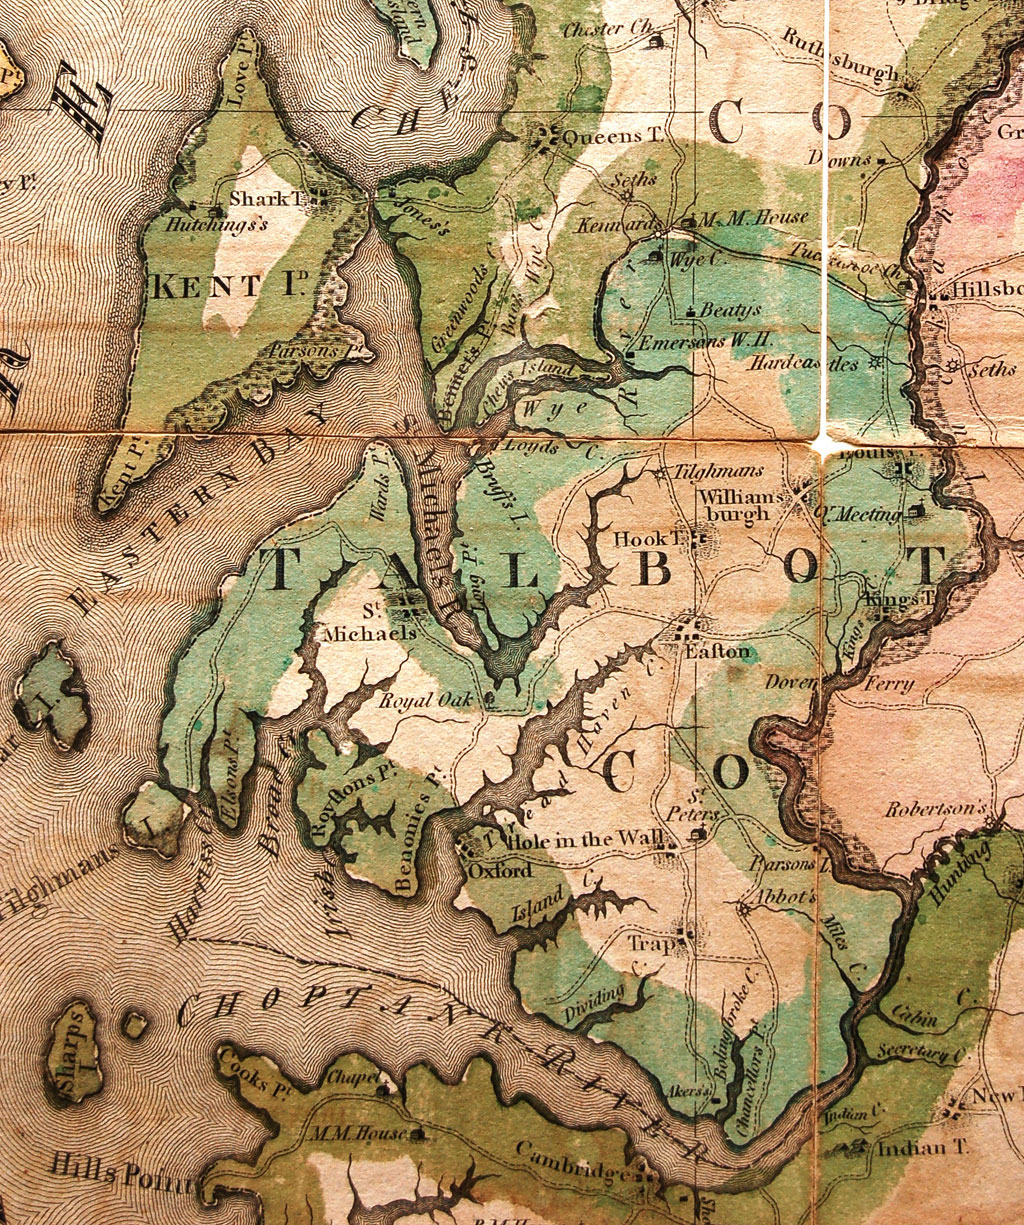 1795 Griffith map